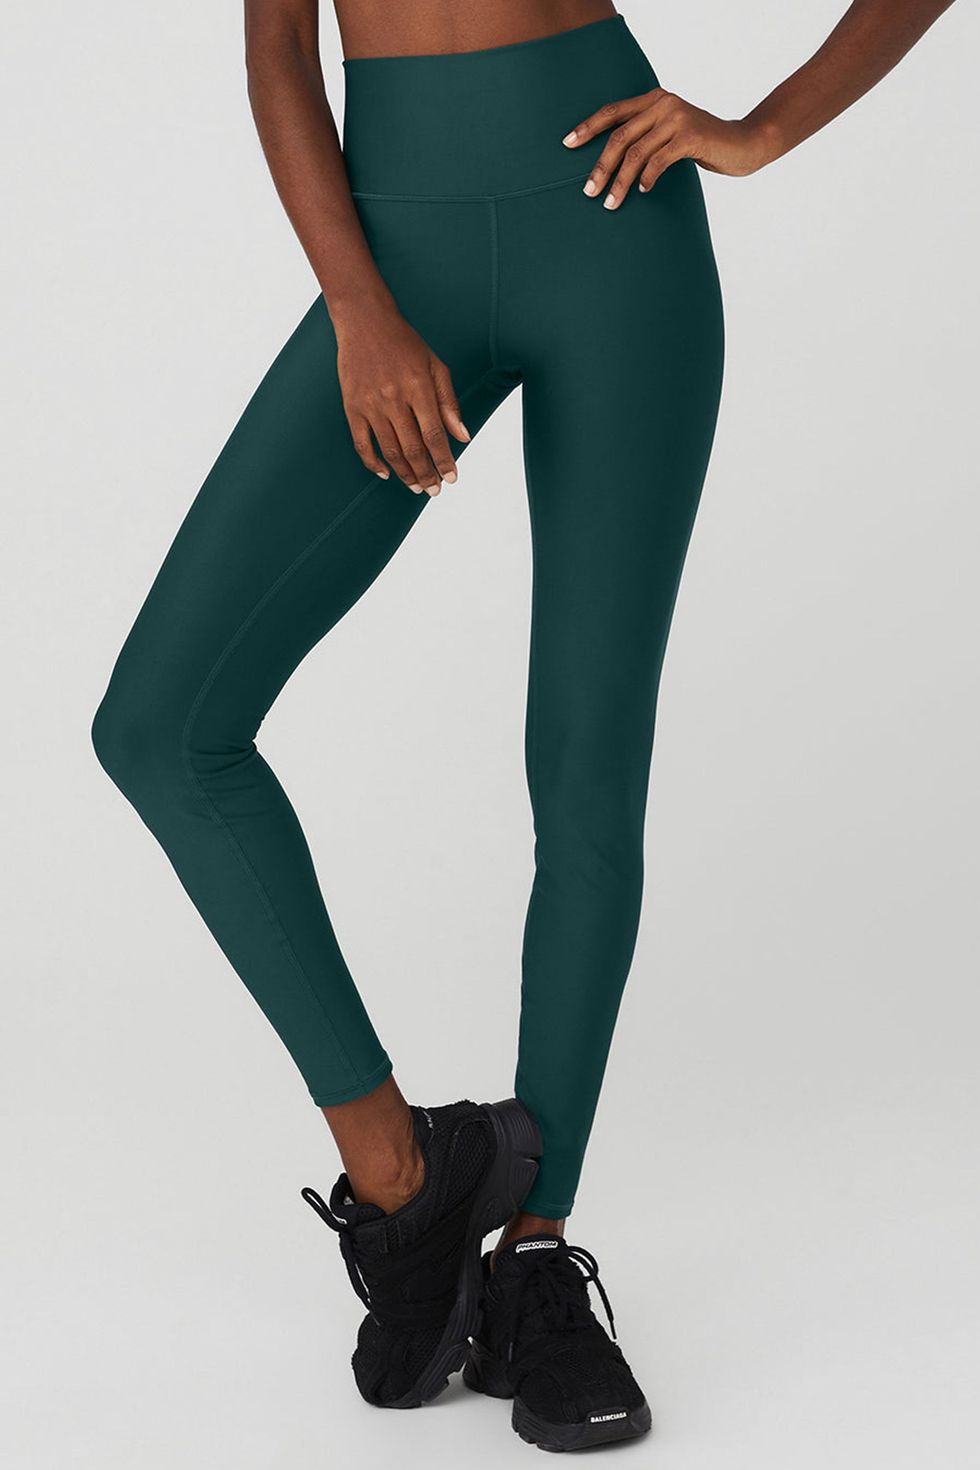 High-Waisted PureLuxe Ruched 7/8 - Fabletics